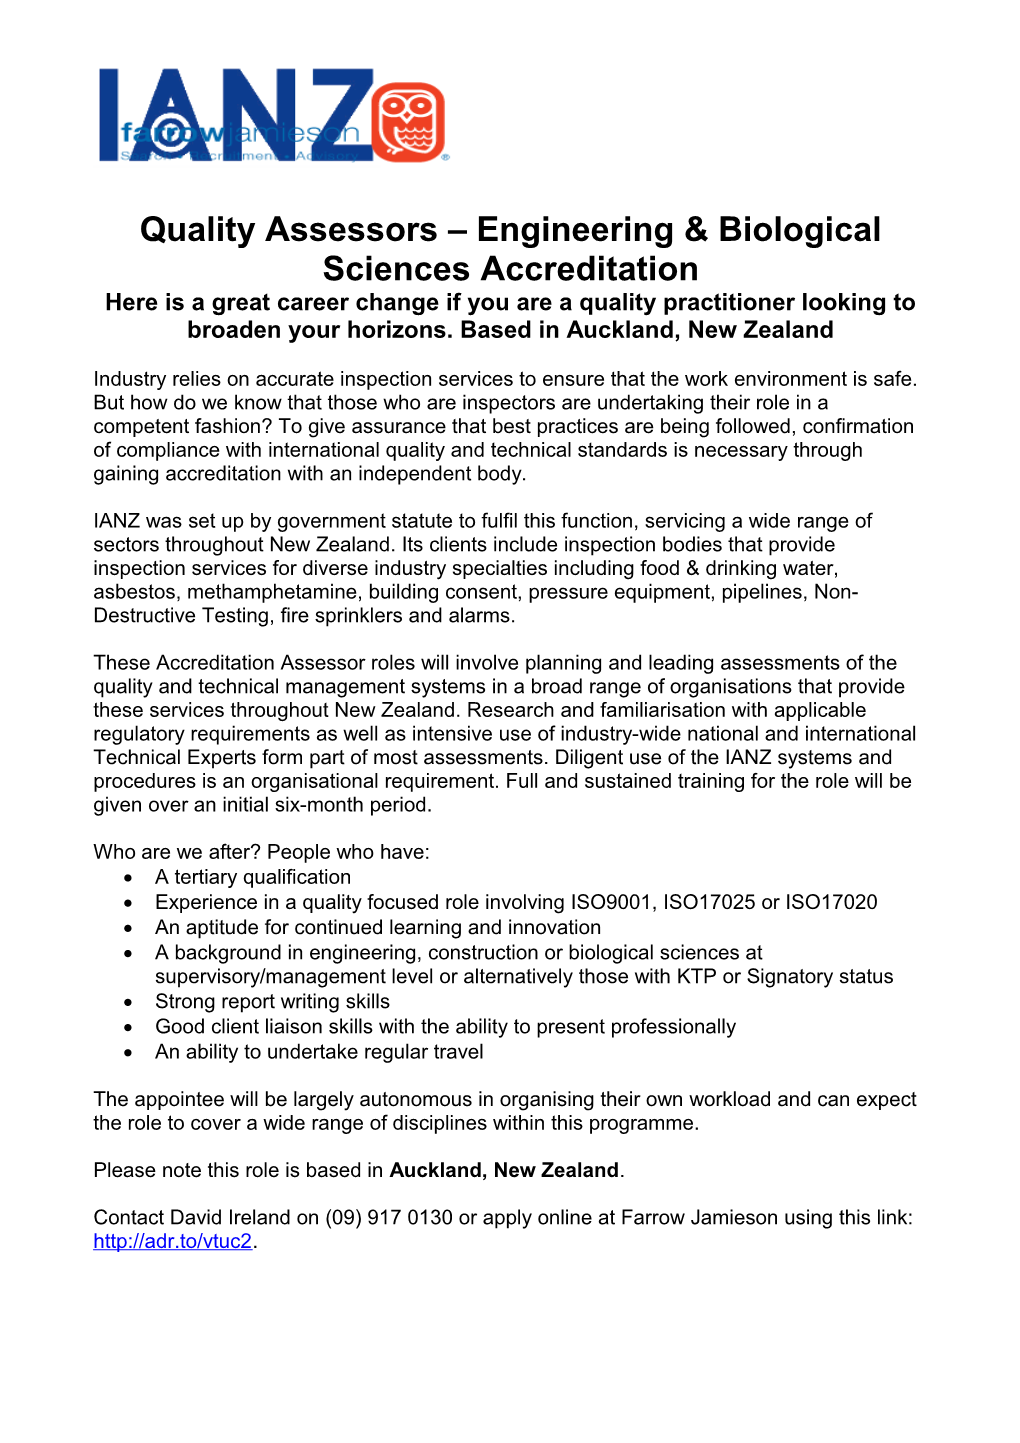 Quality Assessors Engineering & Biological Sciences Accreditation